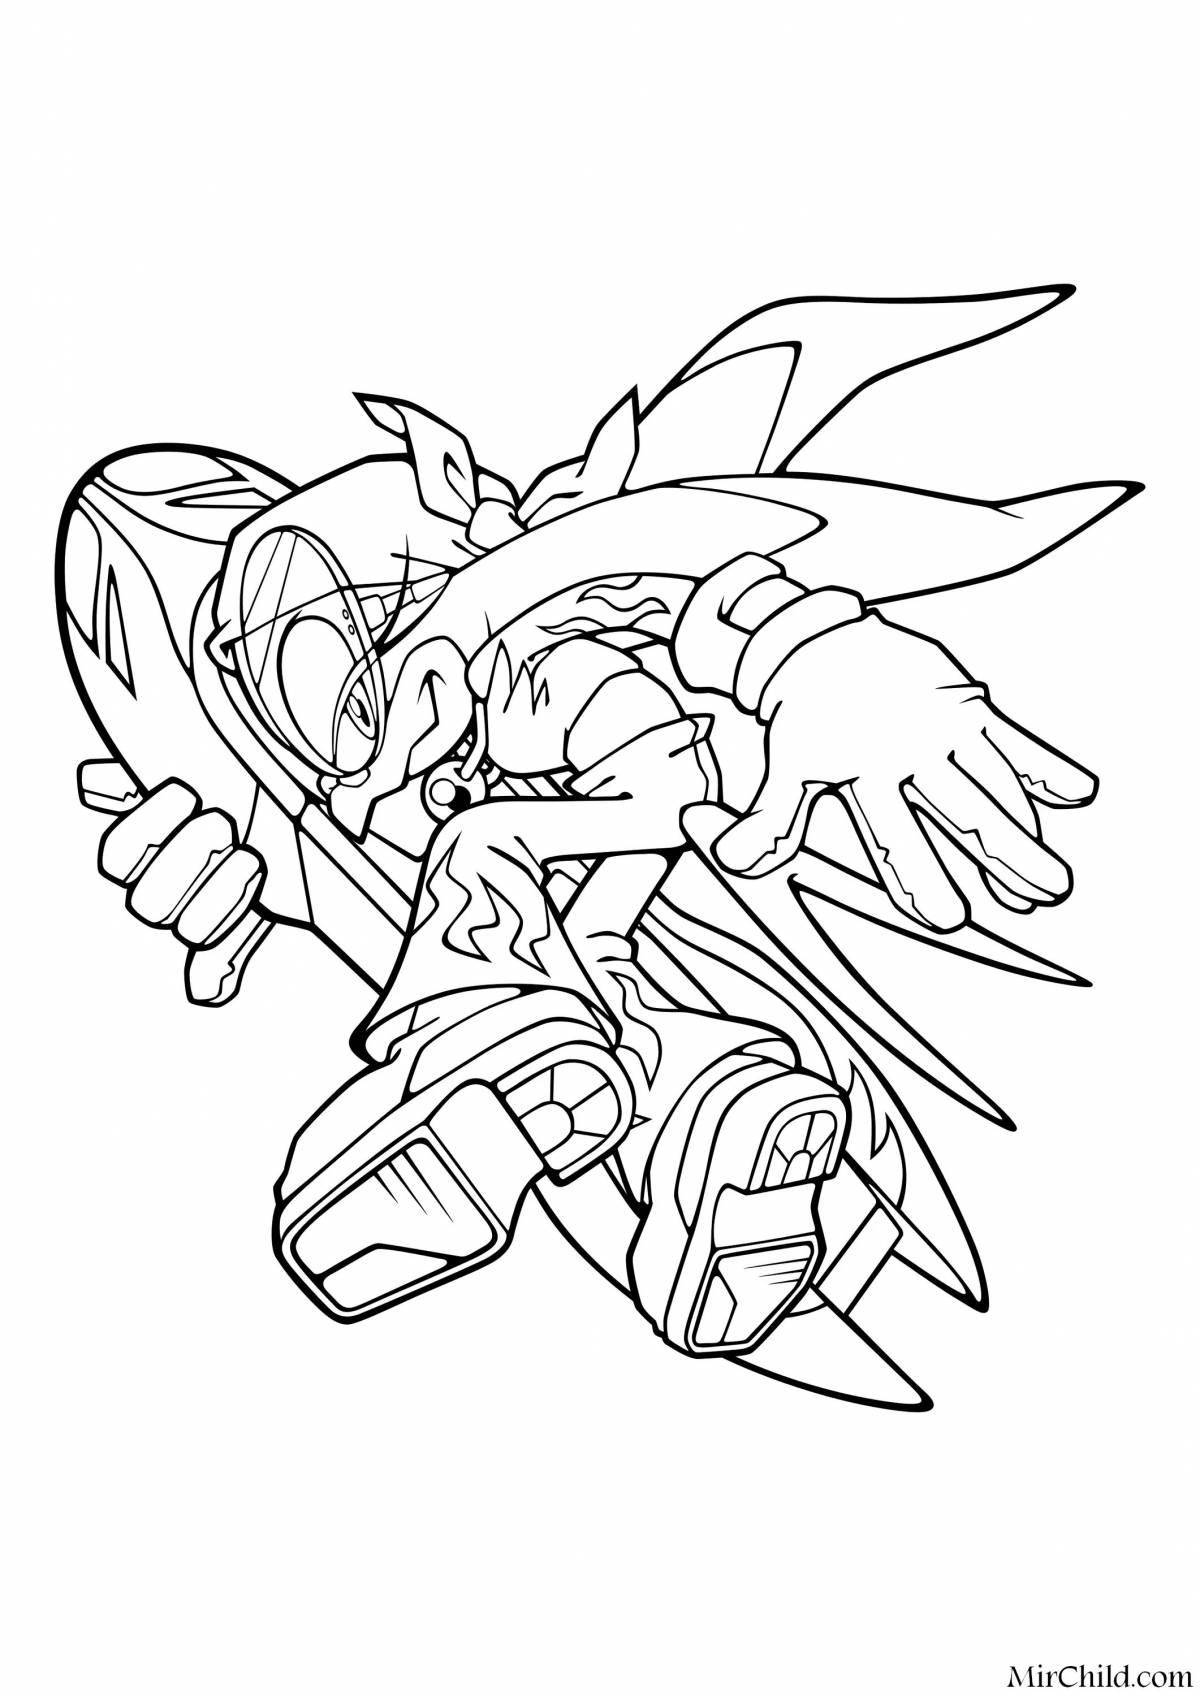 Adorable sonic shredder coloring page